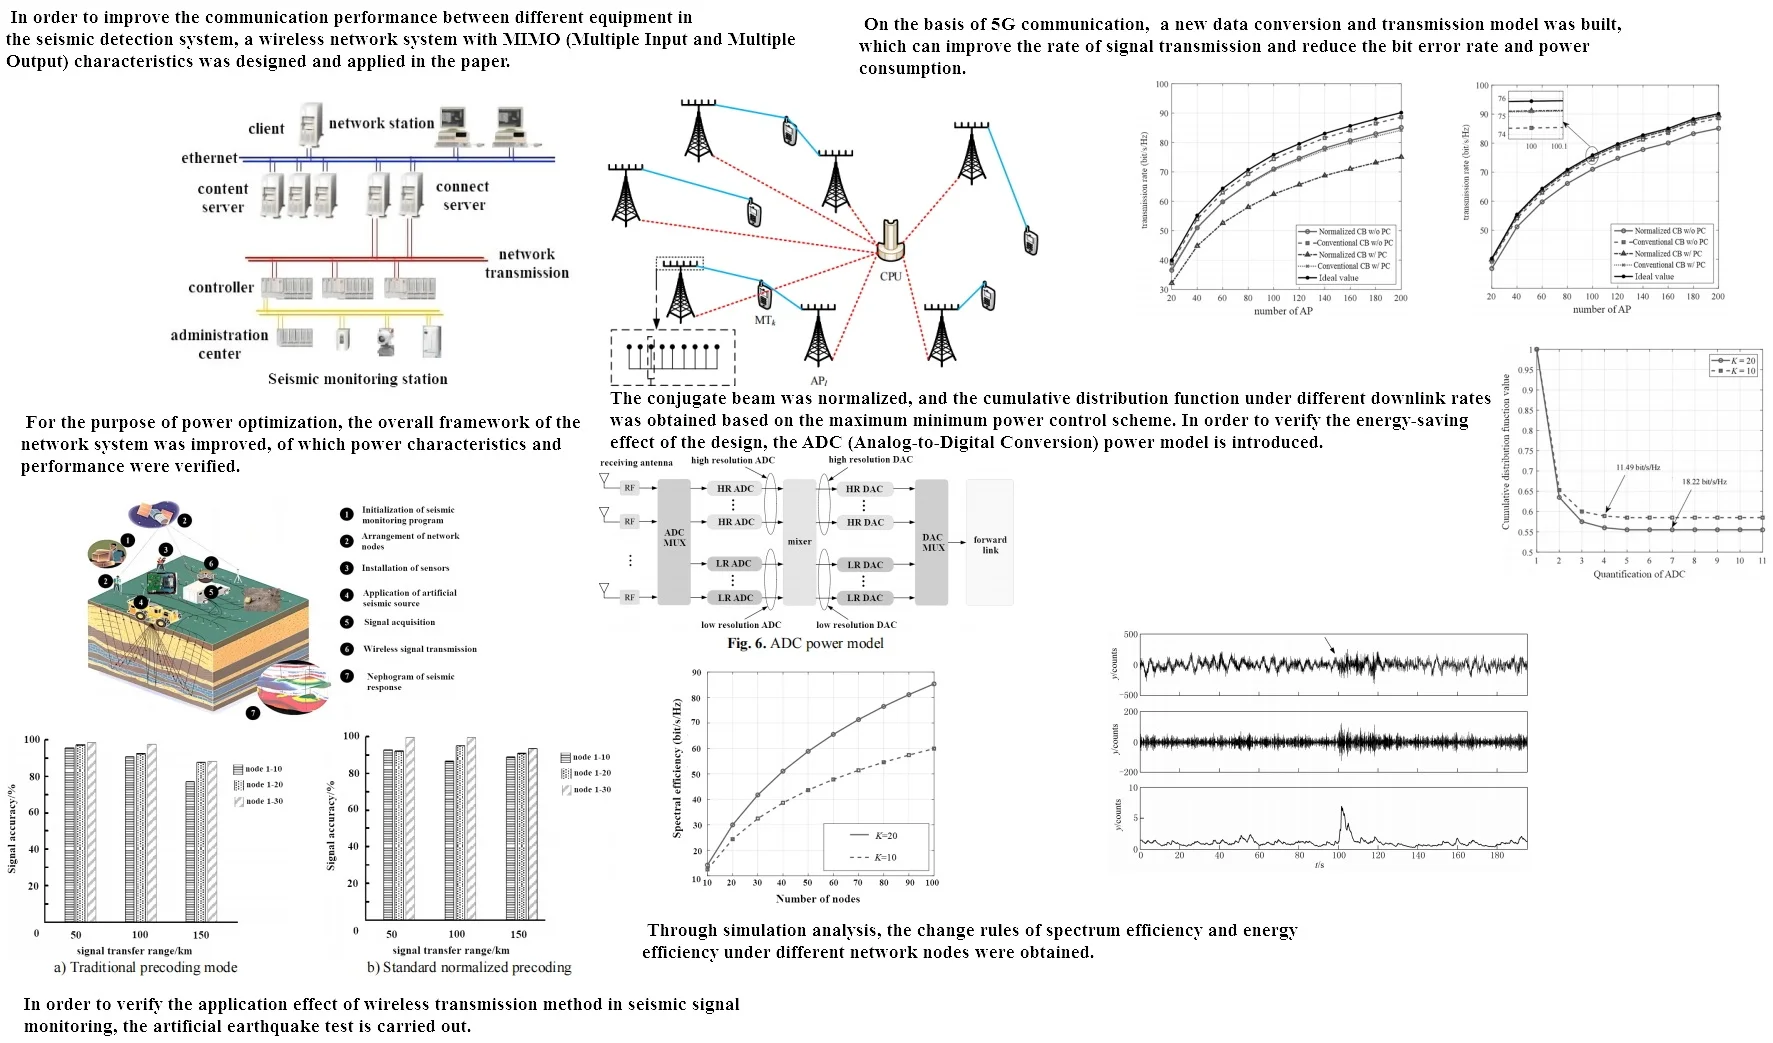 Optimization of communication performance in wireless seismic monitoring system